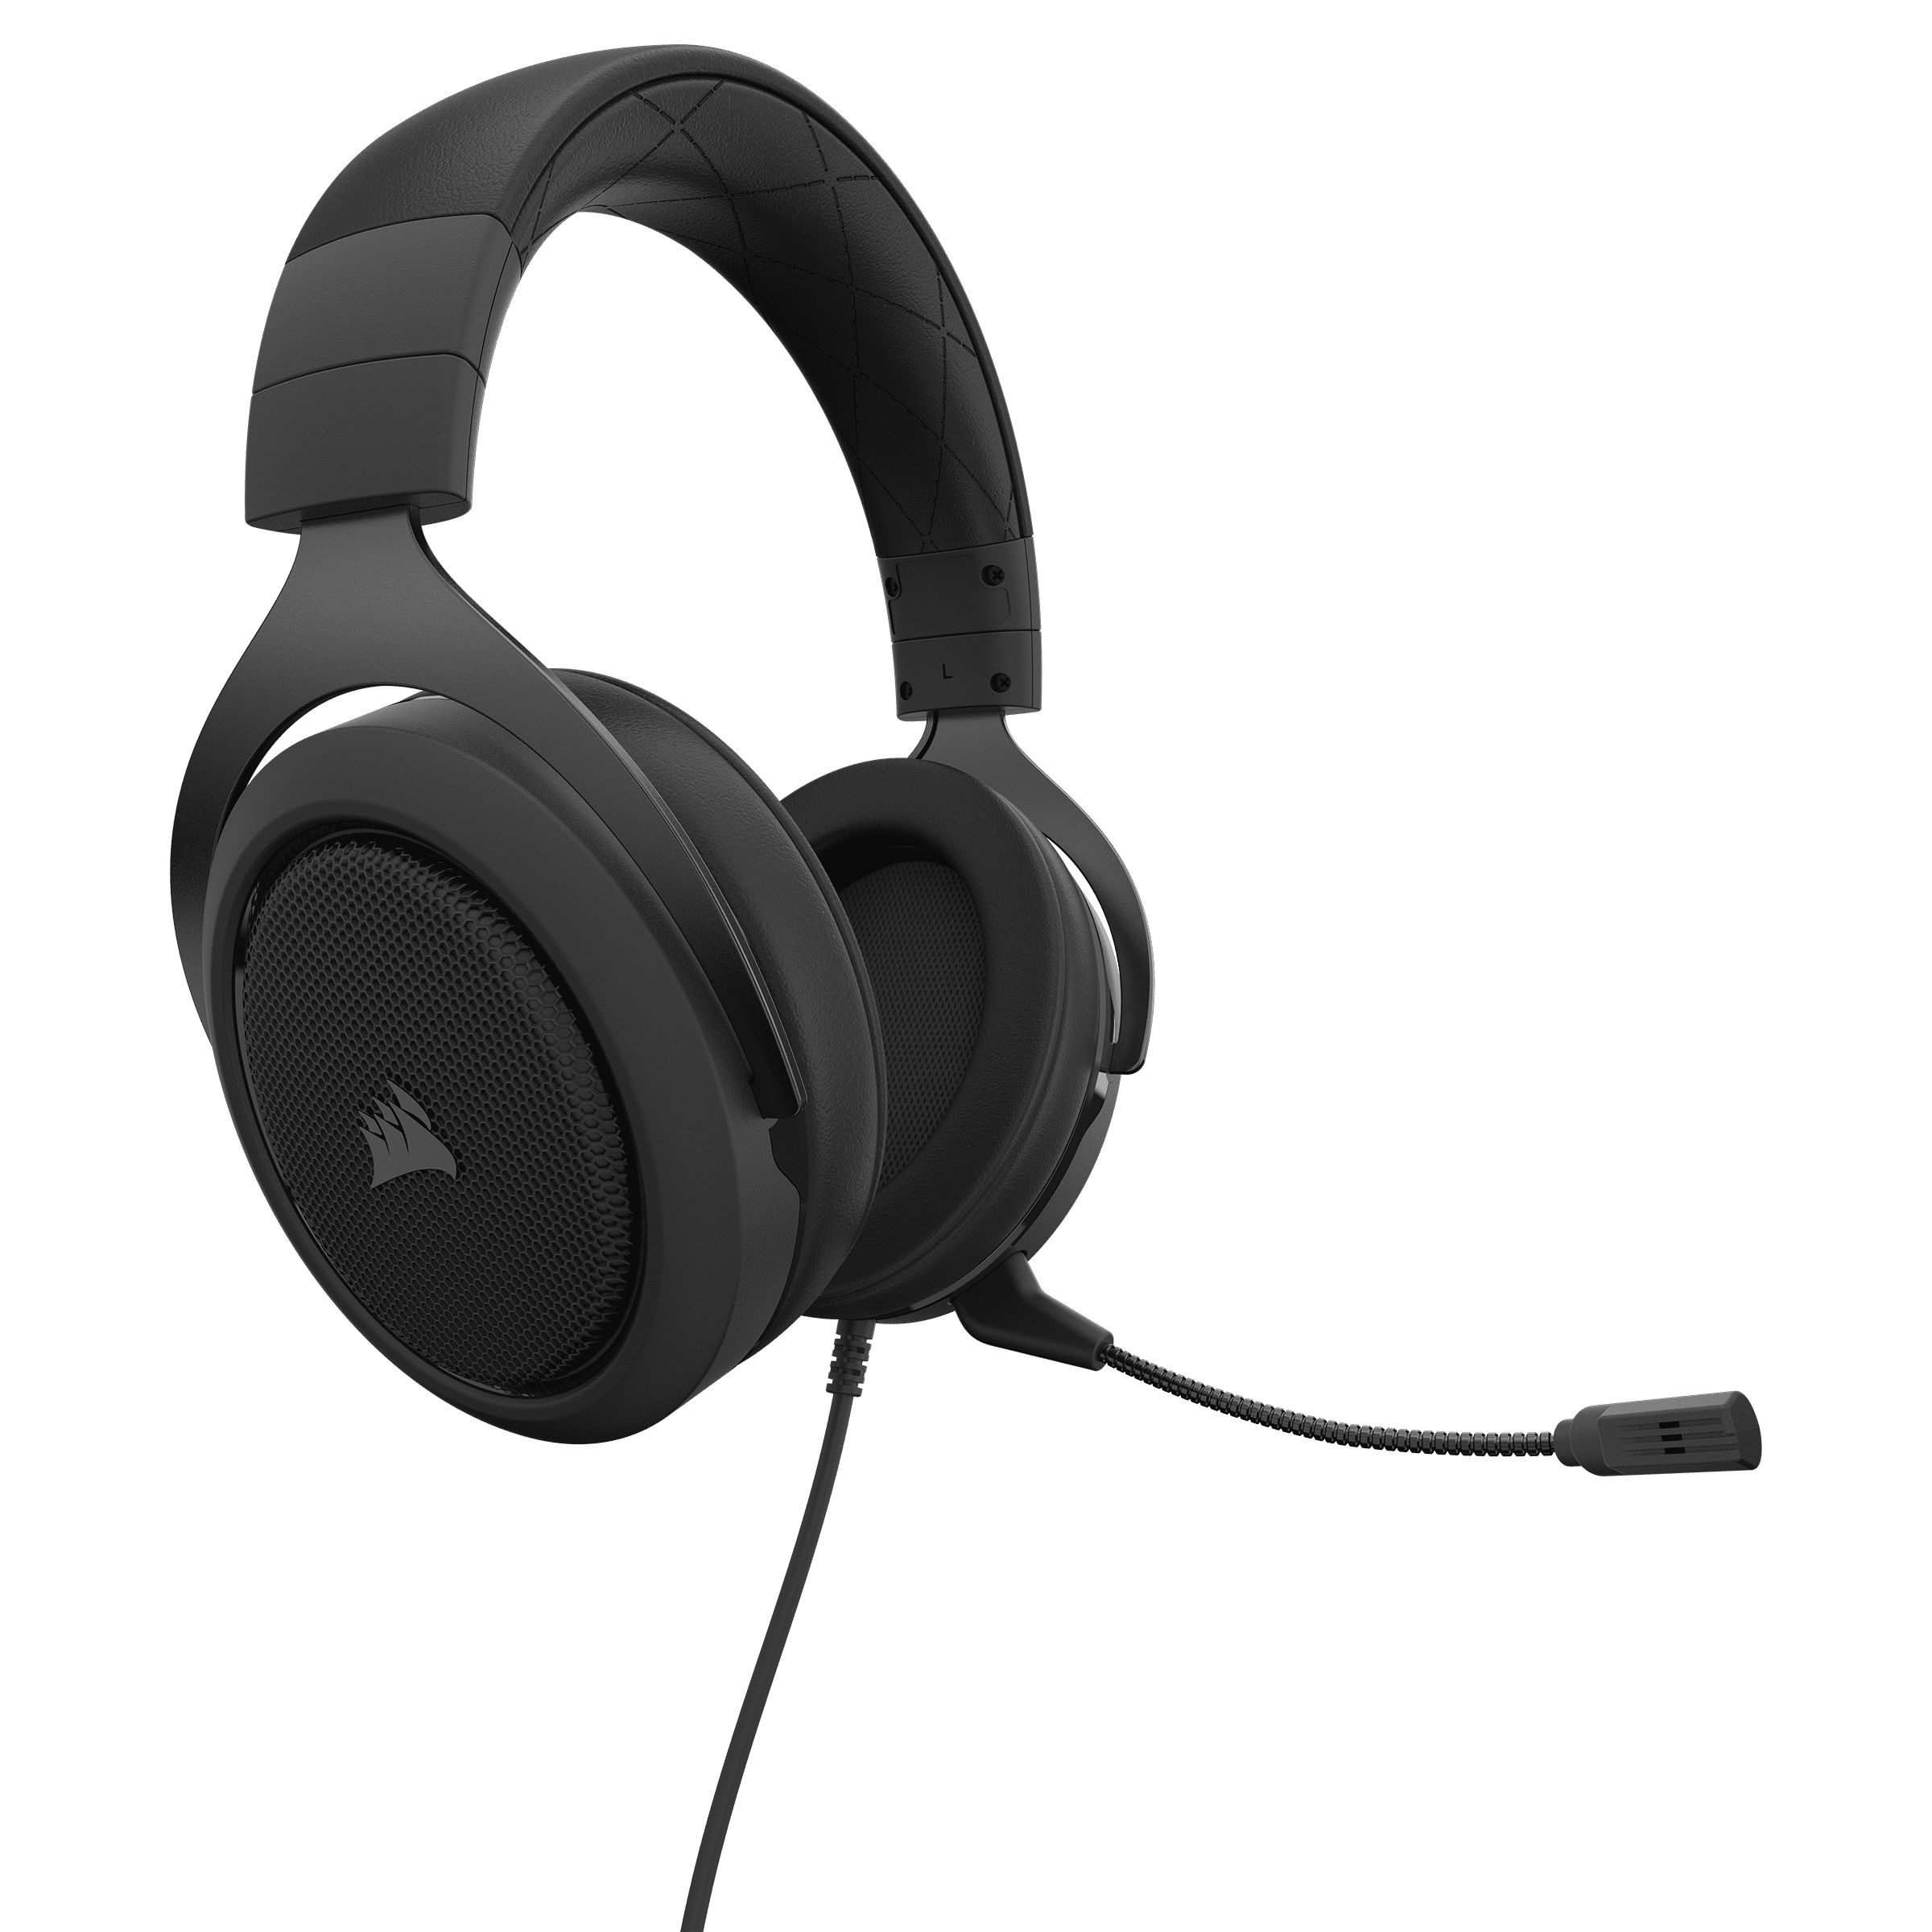 telex Sterkte Gezag Corsair HS50 Pro Stereo Gaming Headset - Discord Certified Headphones -  Works with PC, Mac, Xbox Series X, Xbox Series S, Xbox One, PS5, PS4,  Nintendo Switch, iOS and Android - Carbon - Walmart.com